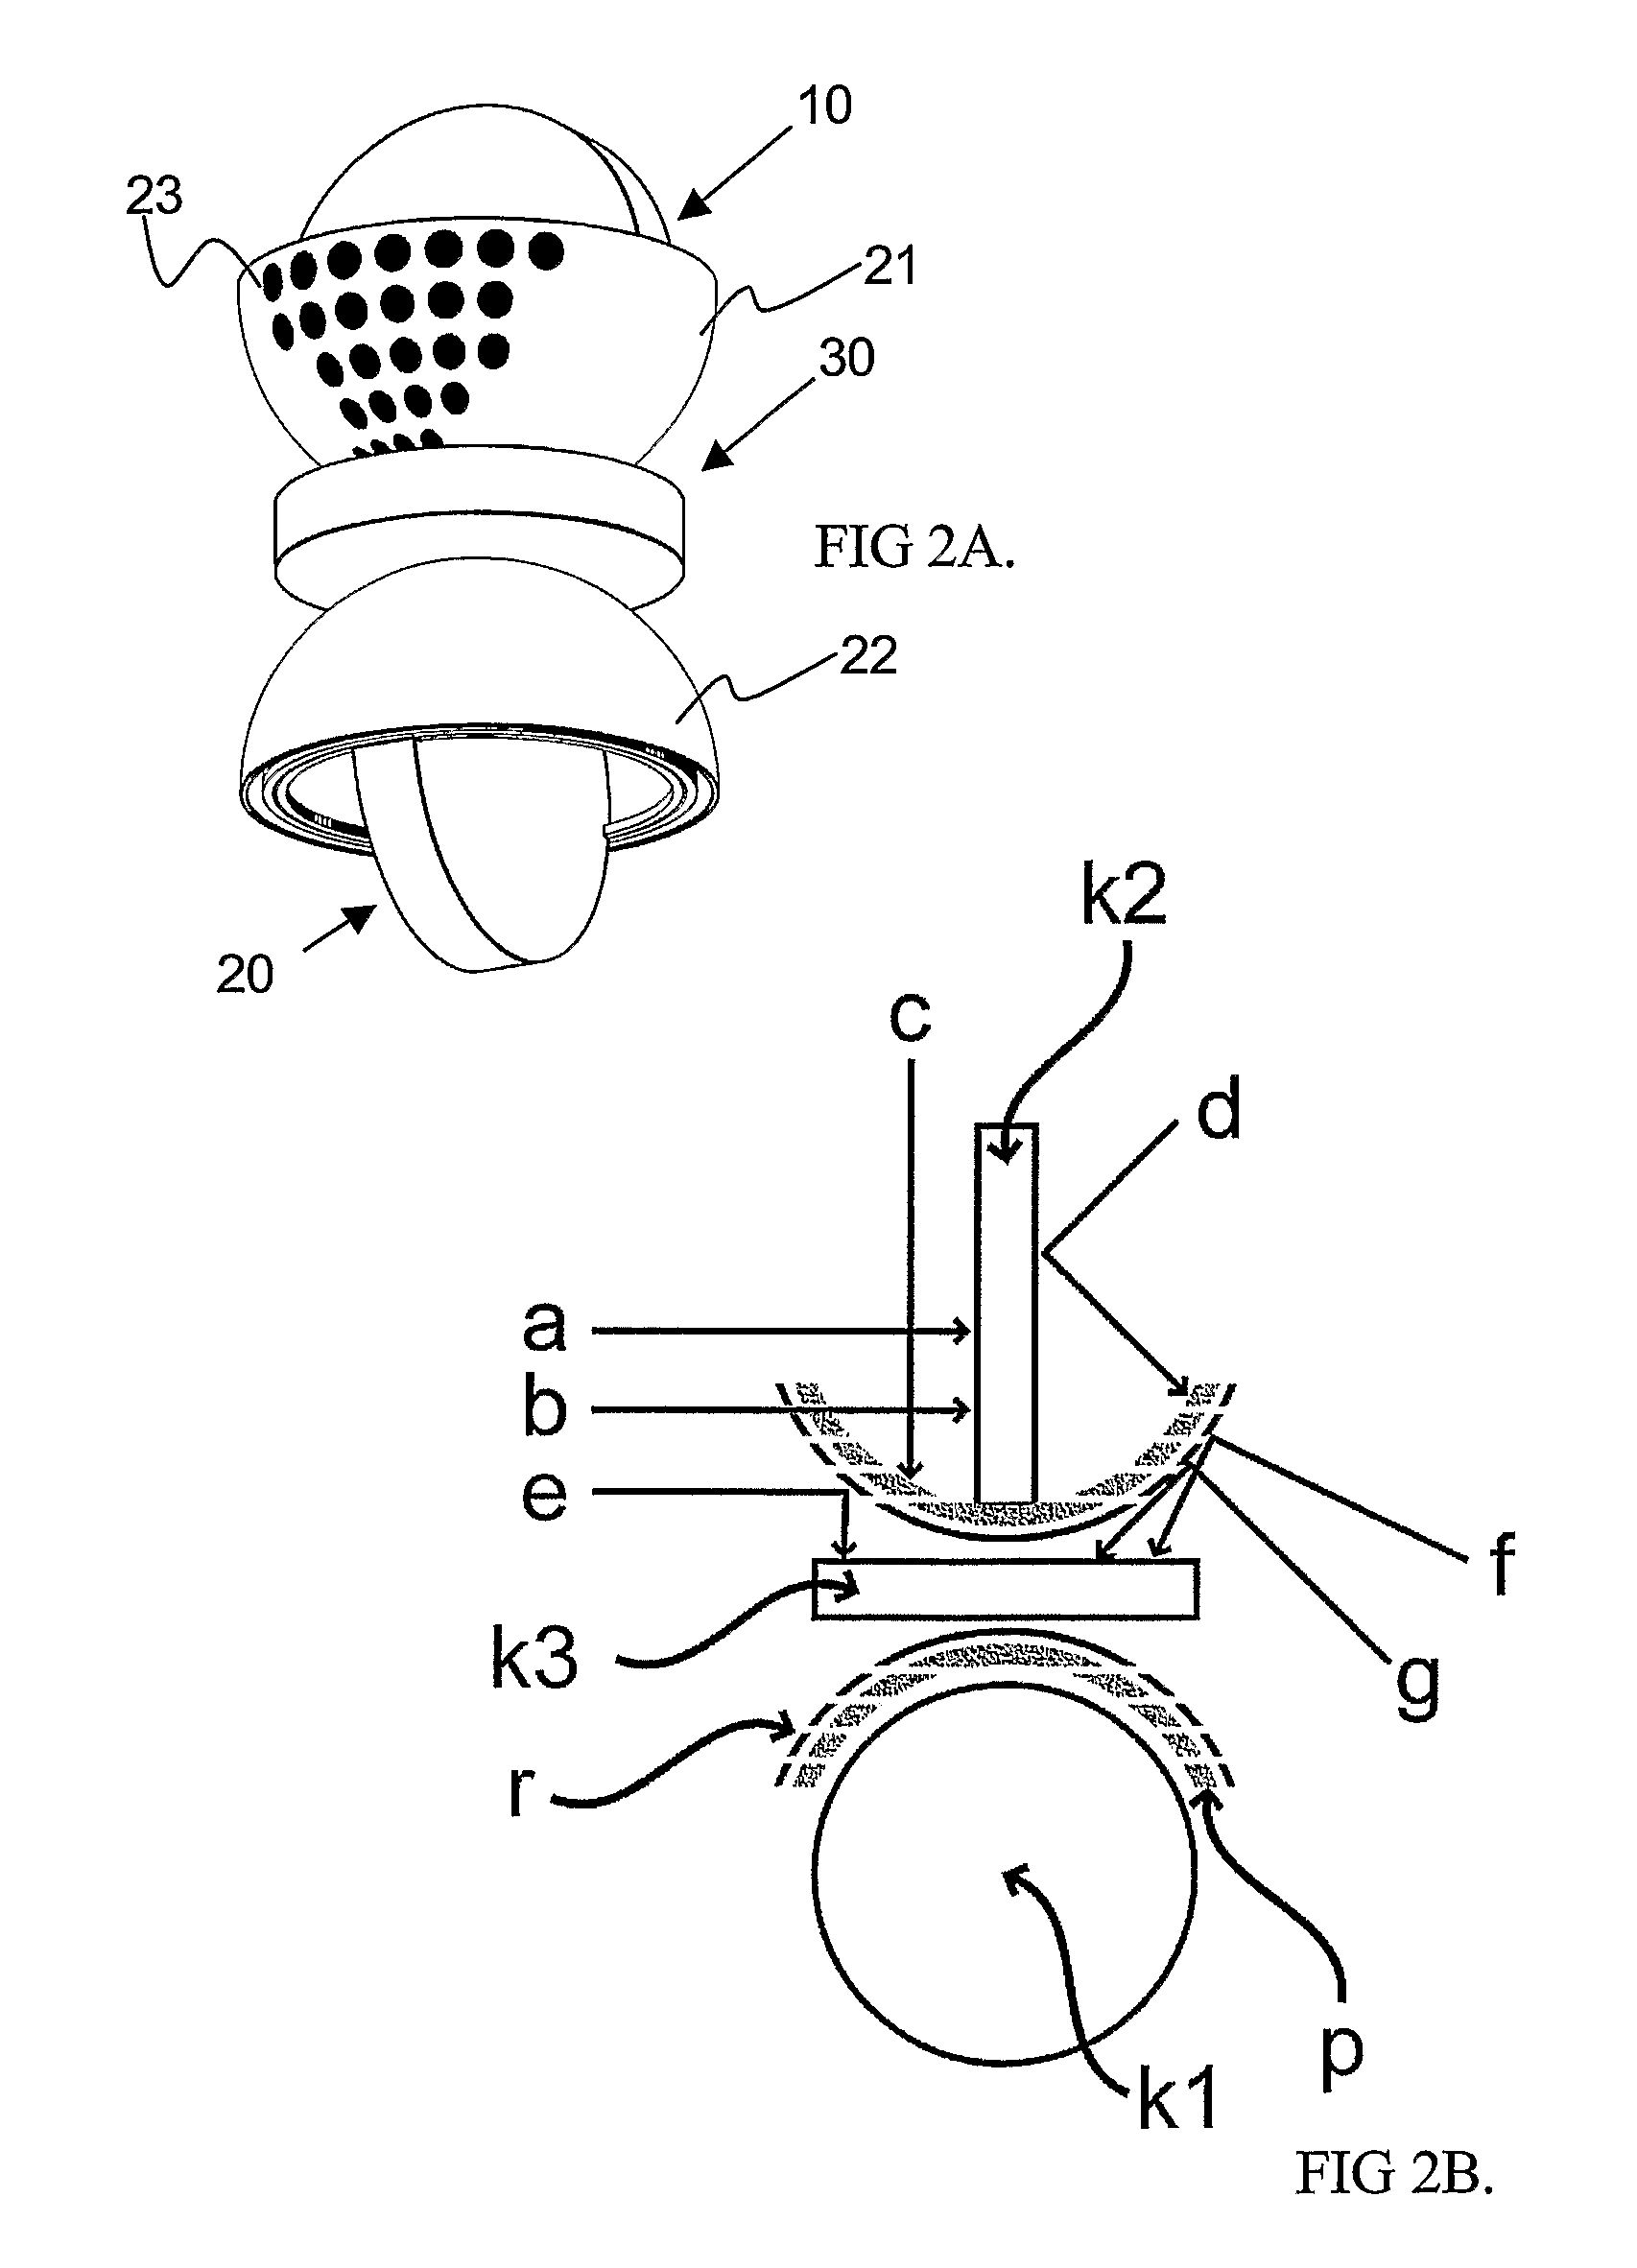 Apparatus, System and Method for Acoustic Signals